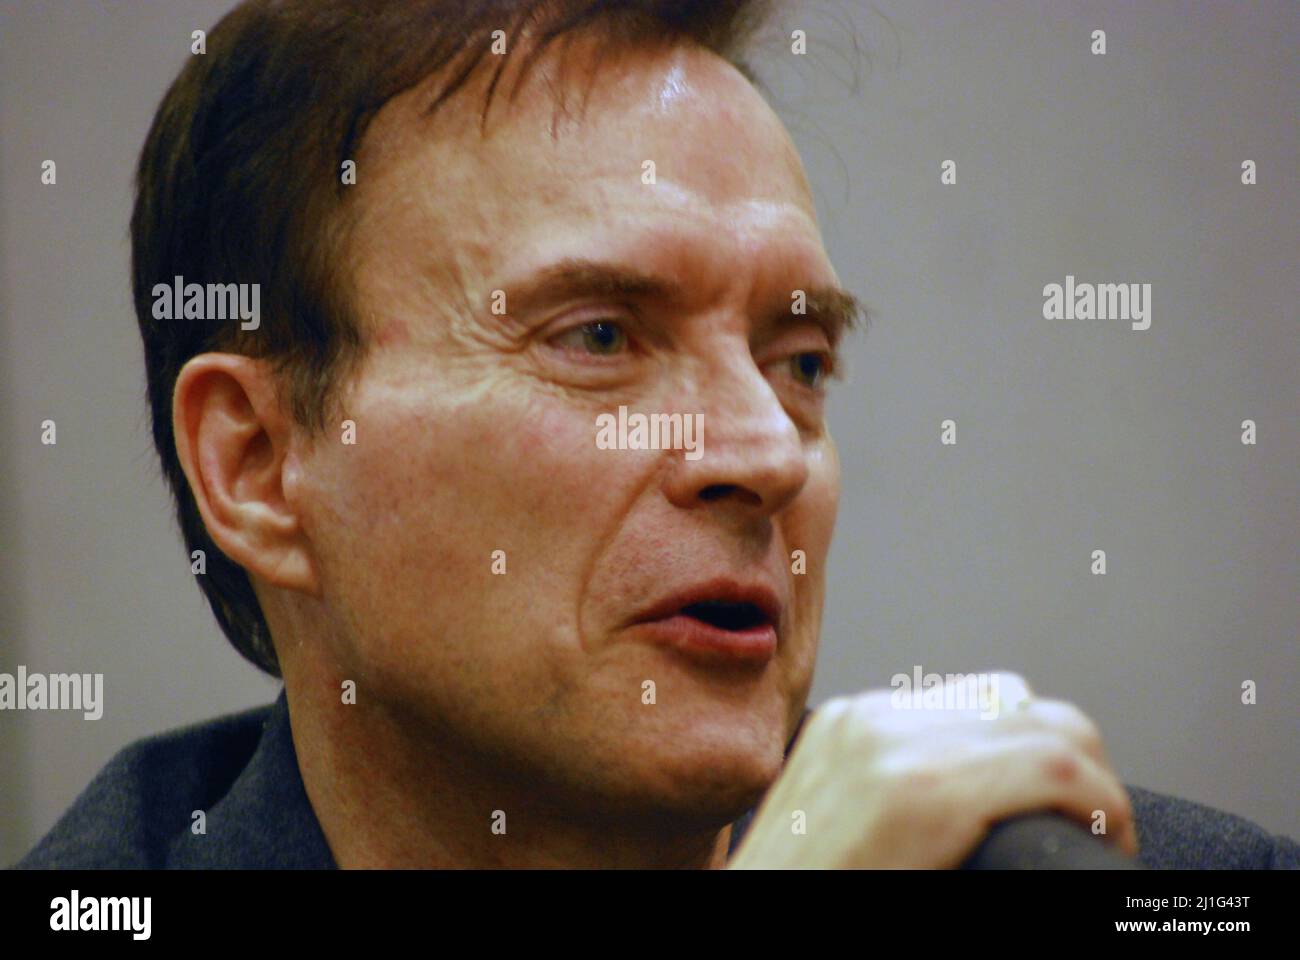 American voice actor, comedian, impressionist & musician, Billy West, known for Bugs Bunny in Space Jam, Ren & Stimpy Show, Futurama, Spitting Image. Stock Photo